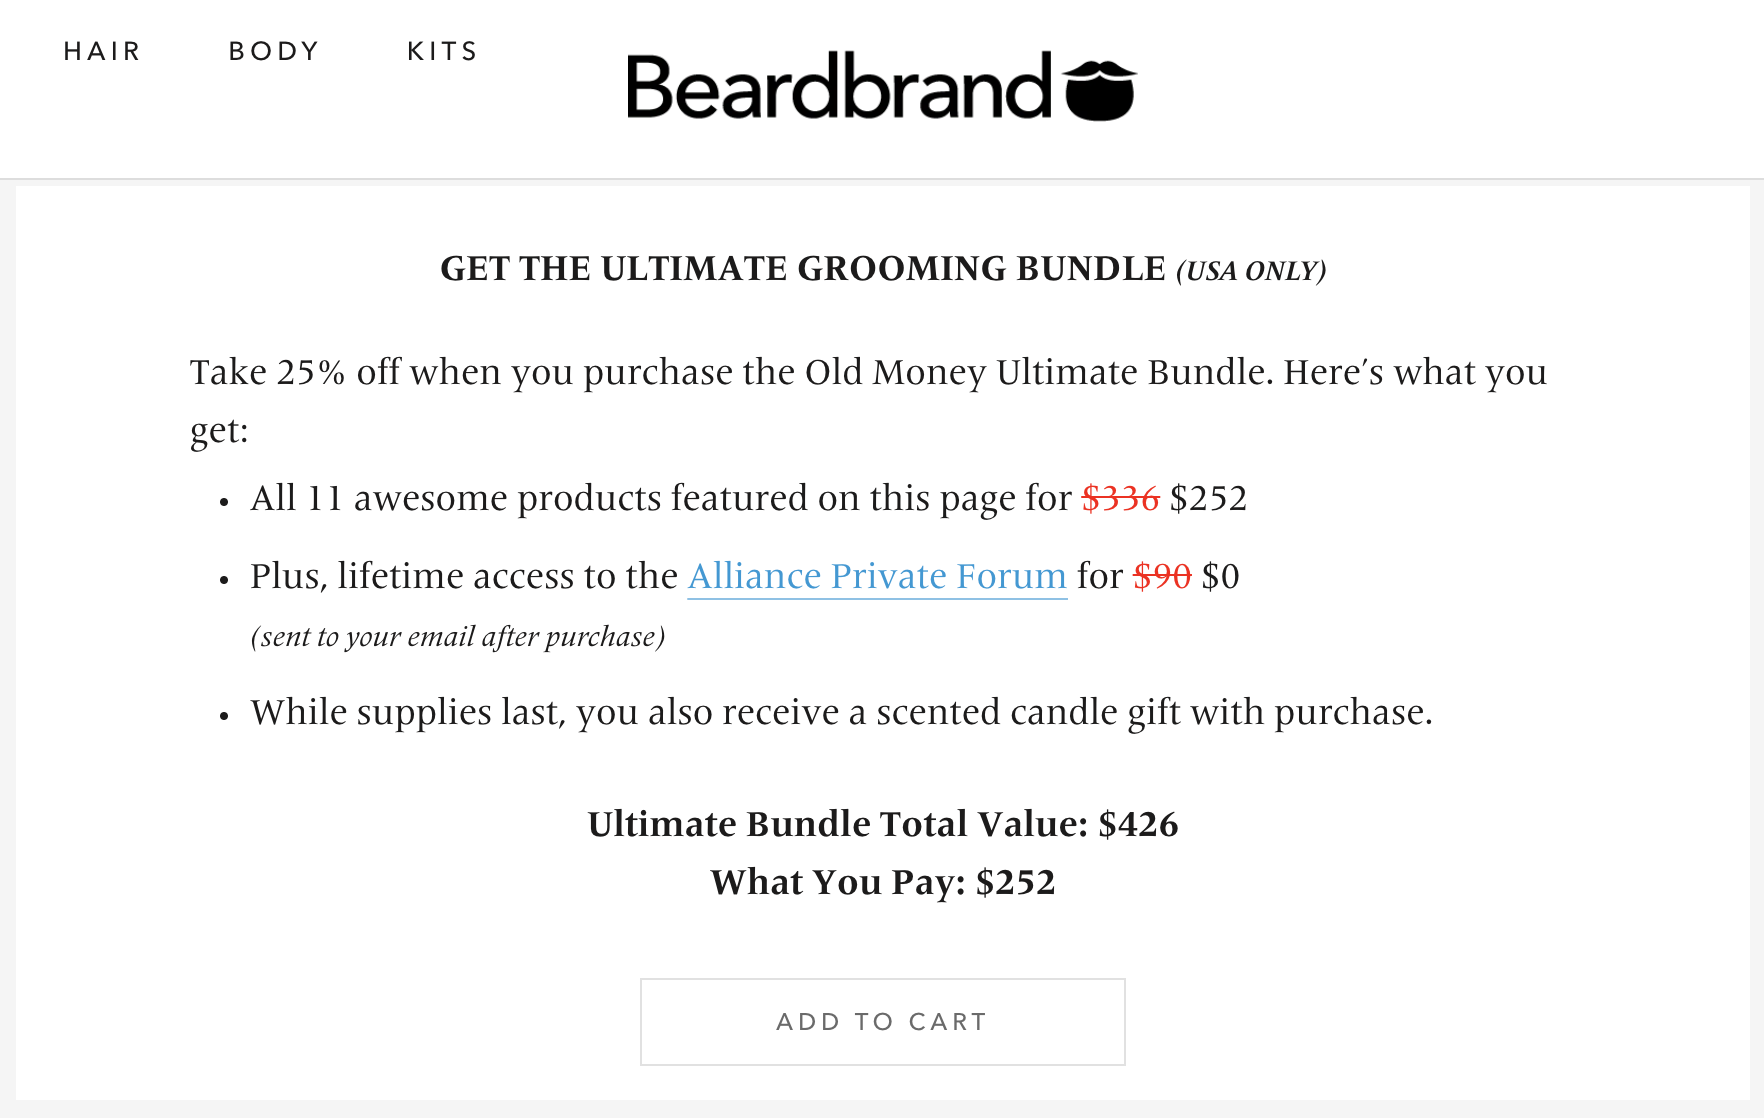 beardbrand ultimate grooming bundle page with add-to-cart button